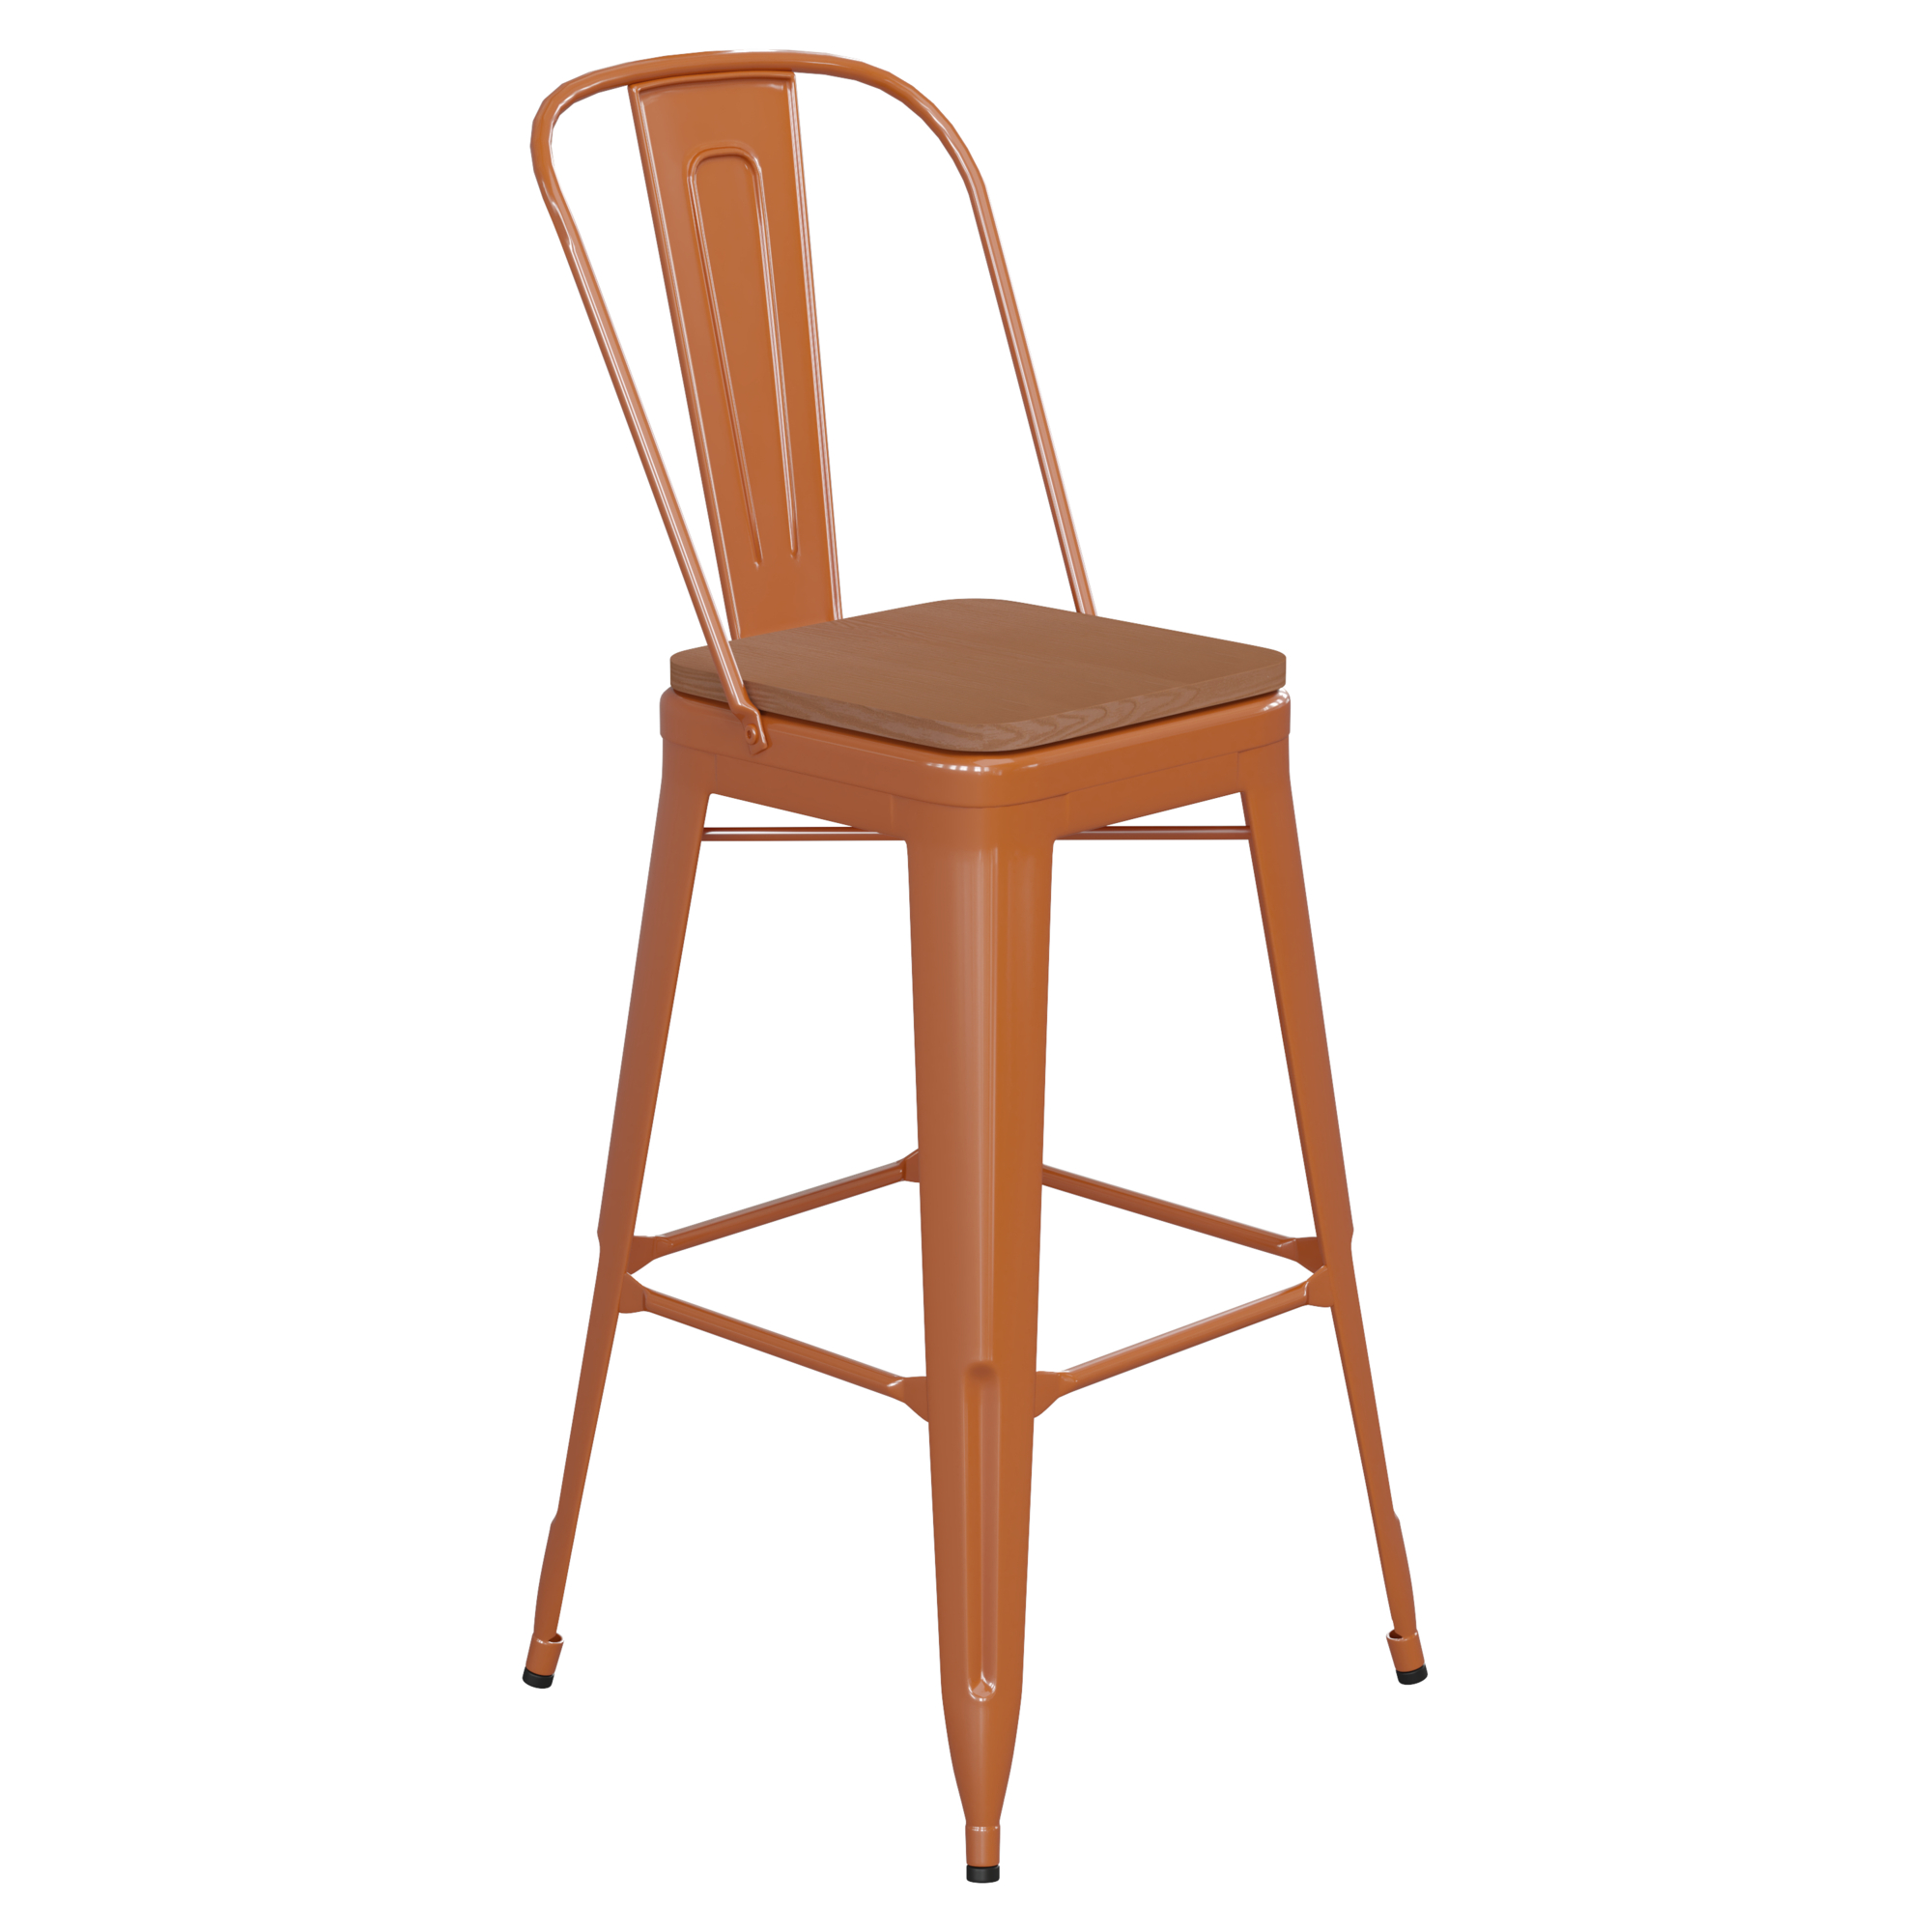 Flash Furniture, 30Inch Orange Metal Counter Stool-Teak Poly Seat, Primary Color Orange, Included (qty.) 1, Model CH3132030GORP2T